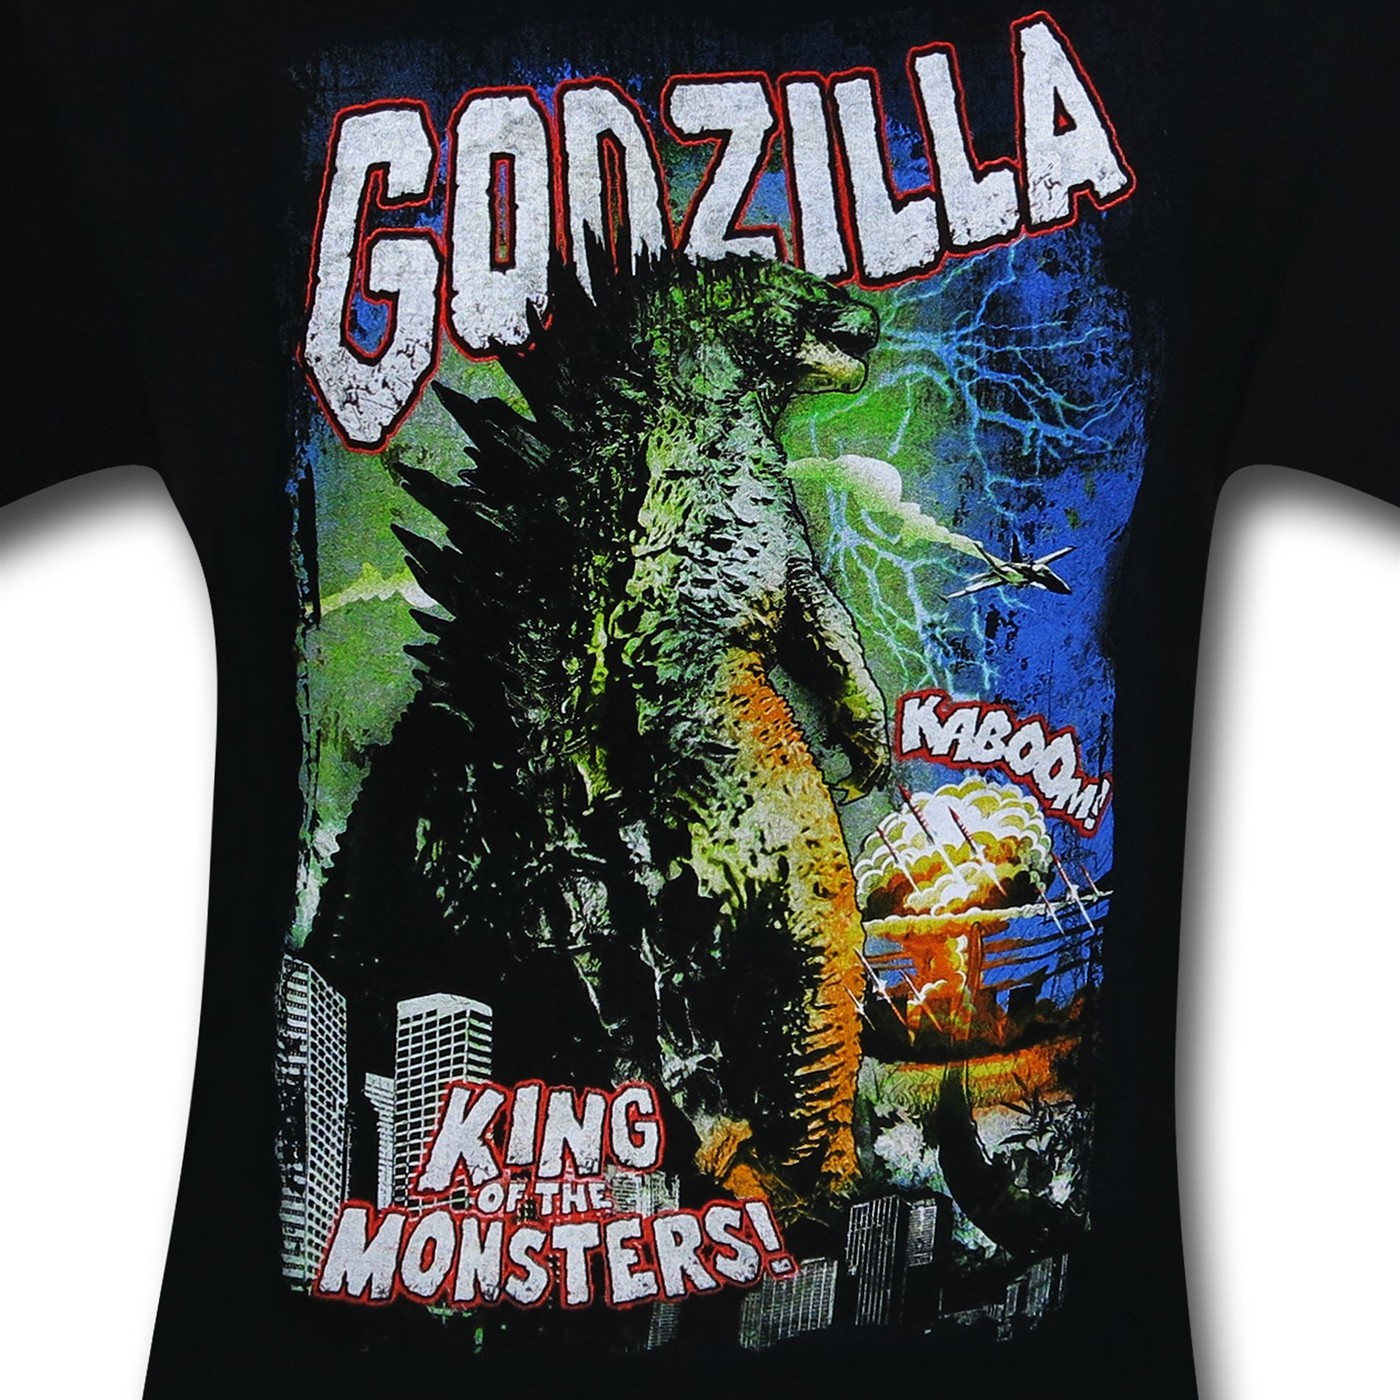 Godzilla King of the Monsters on Black T-Shirt